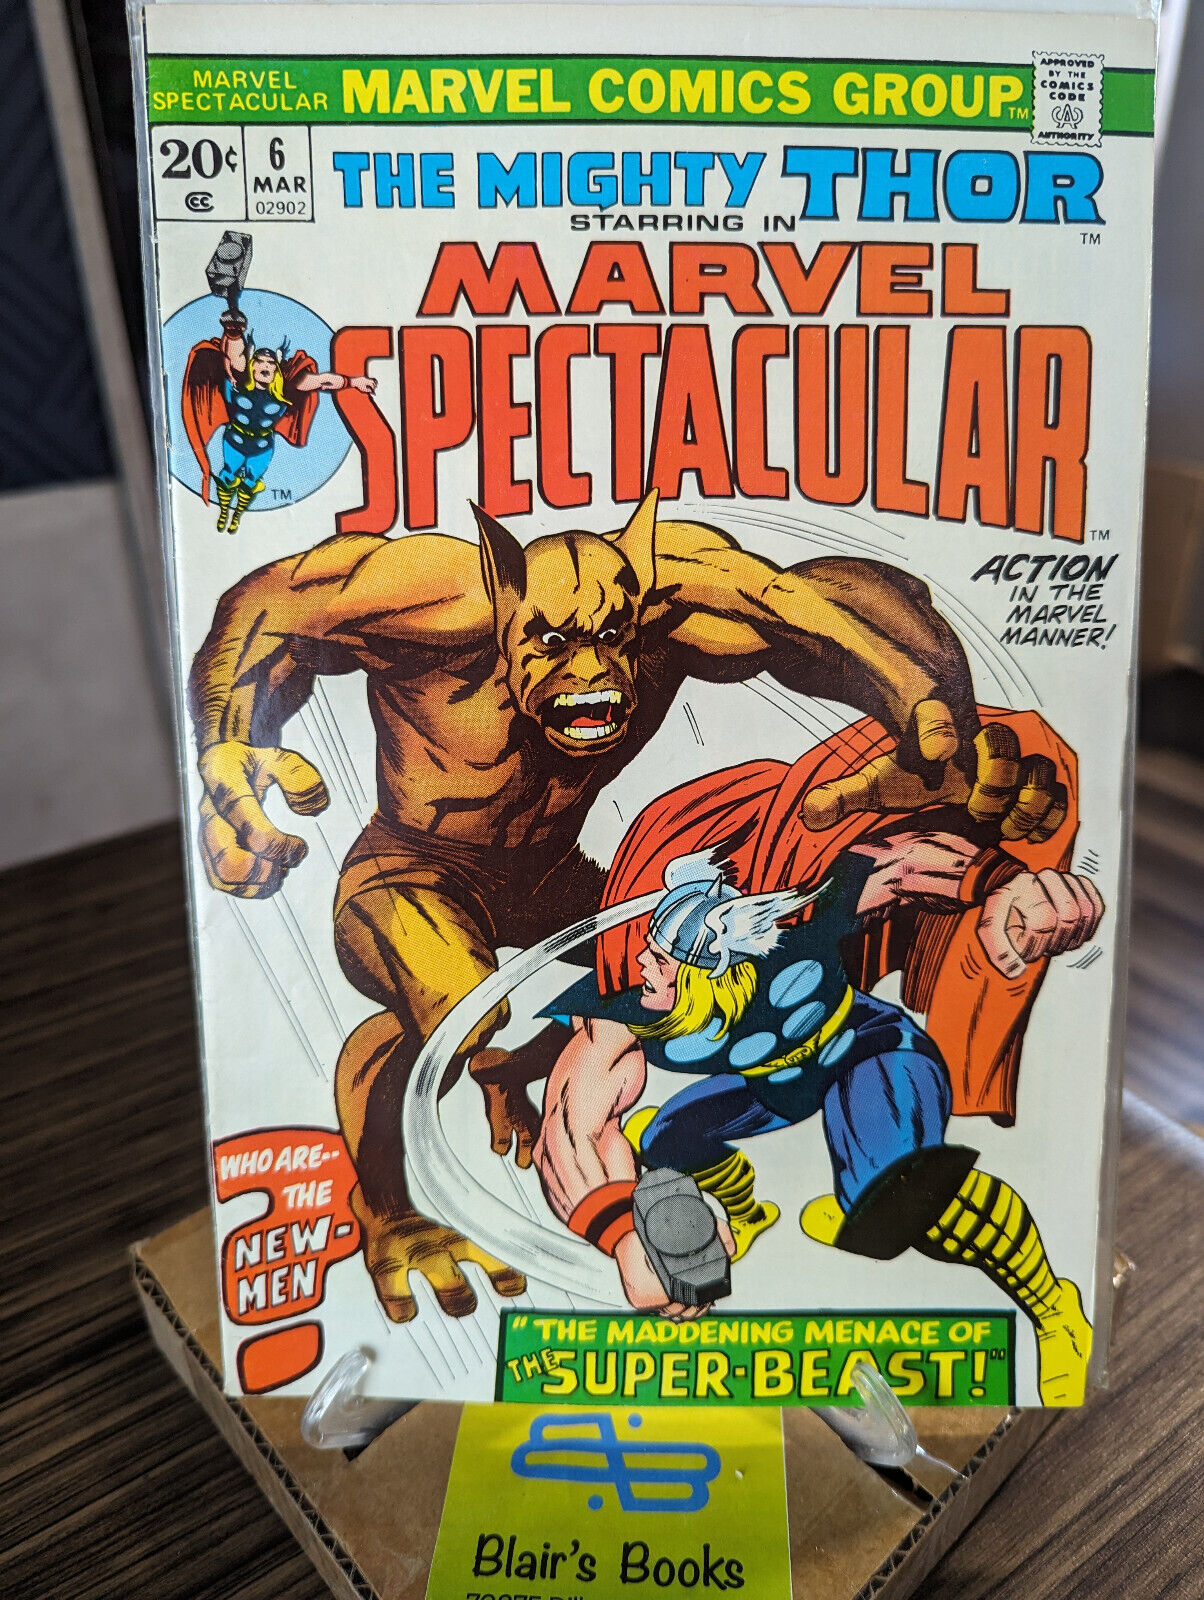 Bronze Age MARVEL SPECTACULAR #6 [1974] VF- 7.5; Lee/Kirby Reprint of Thor #135